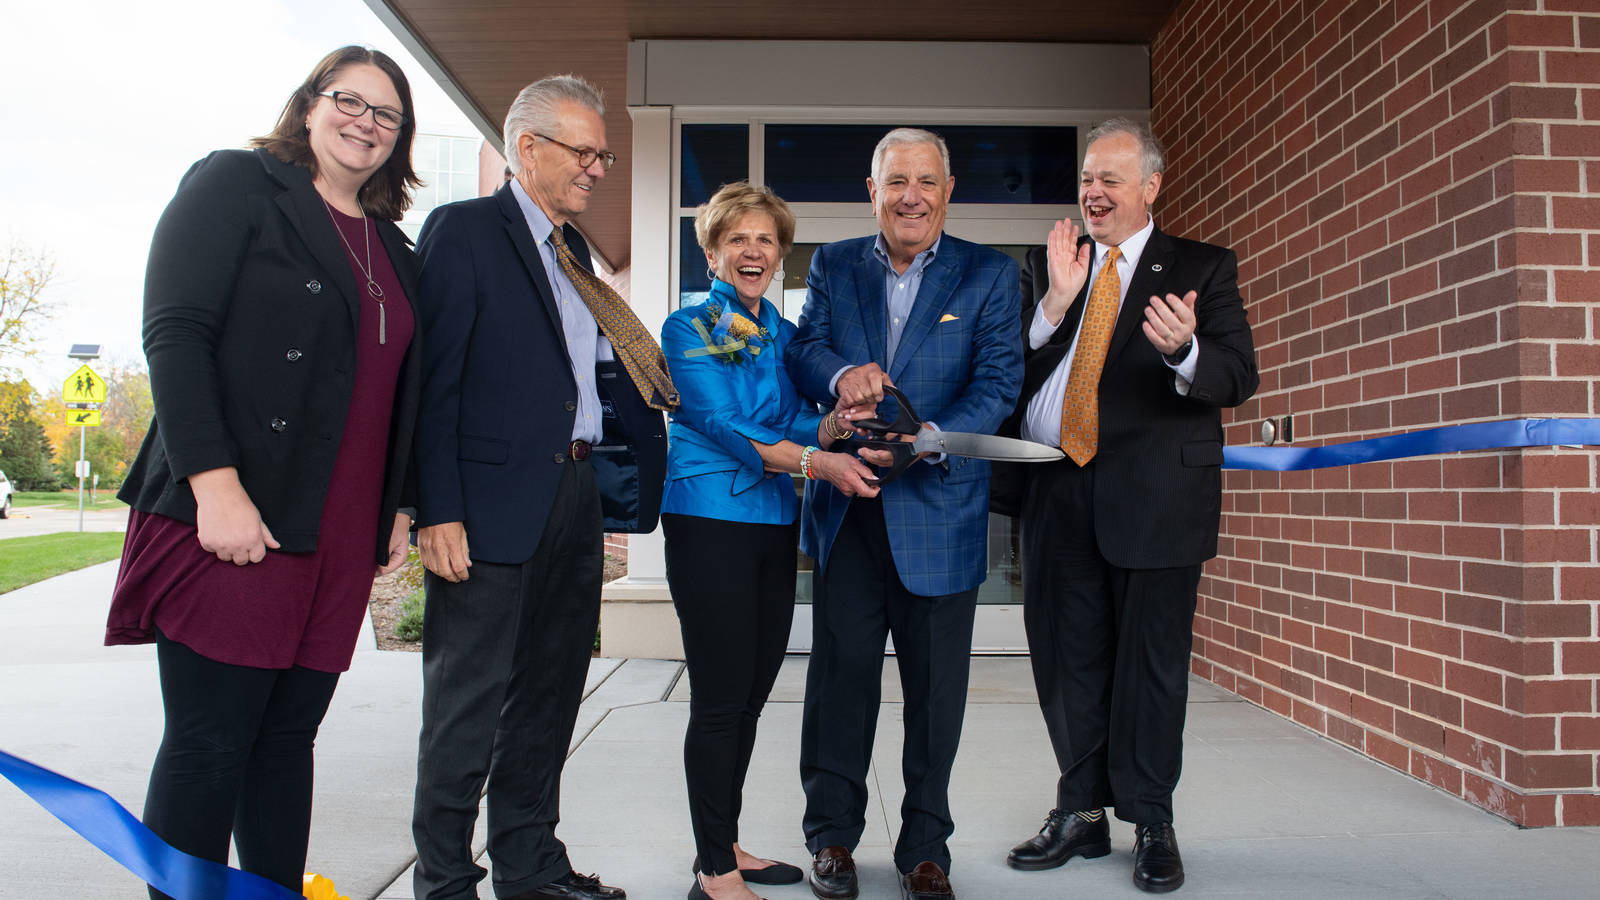 Tom and Jeannie Flesch (center) cut the ribbon at the dedication of the Flesch Family Welcome Center